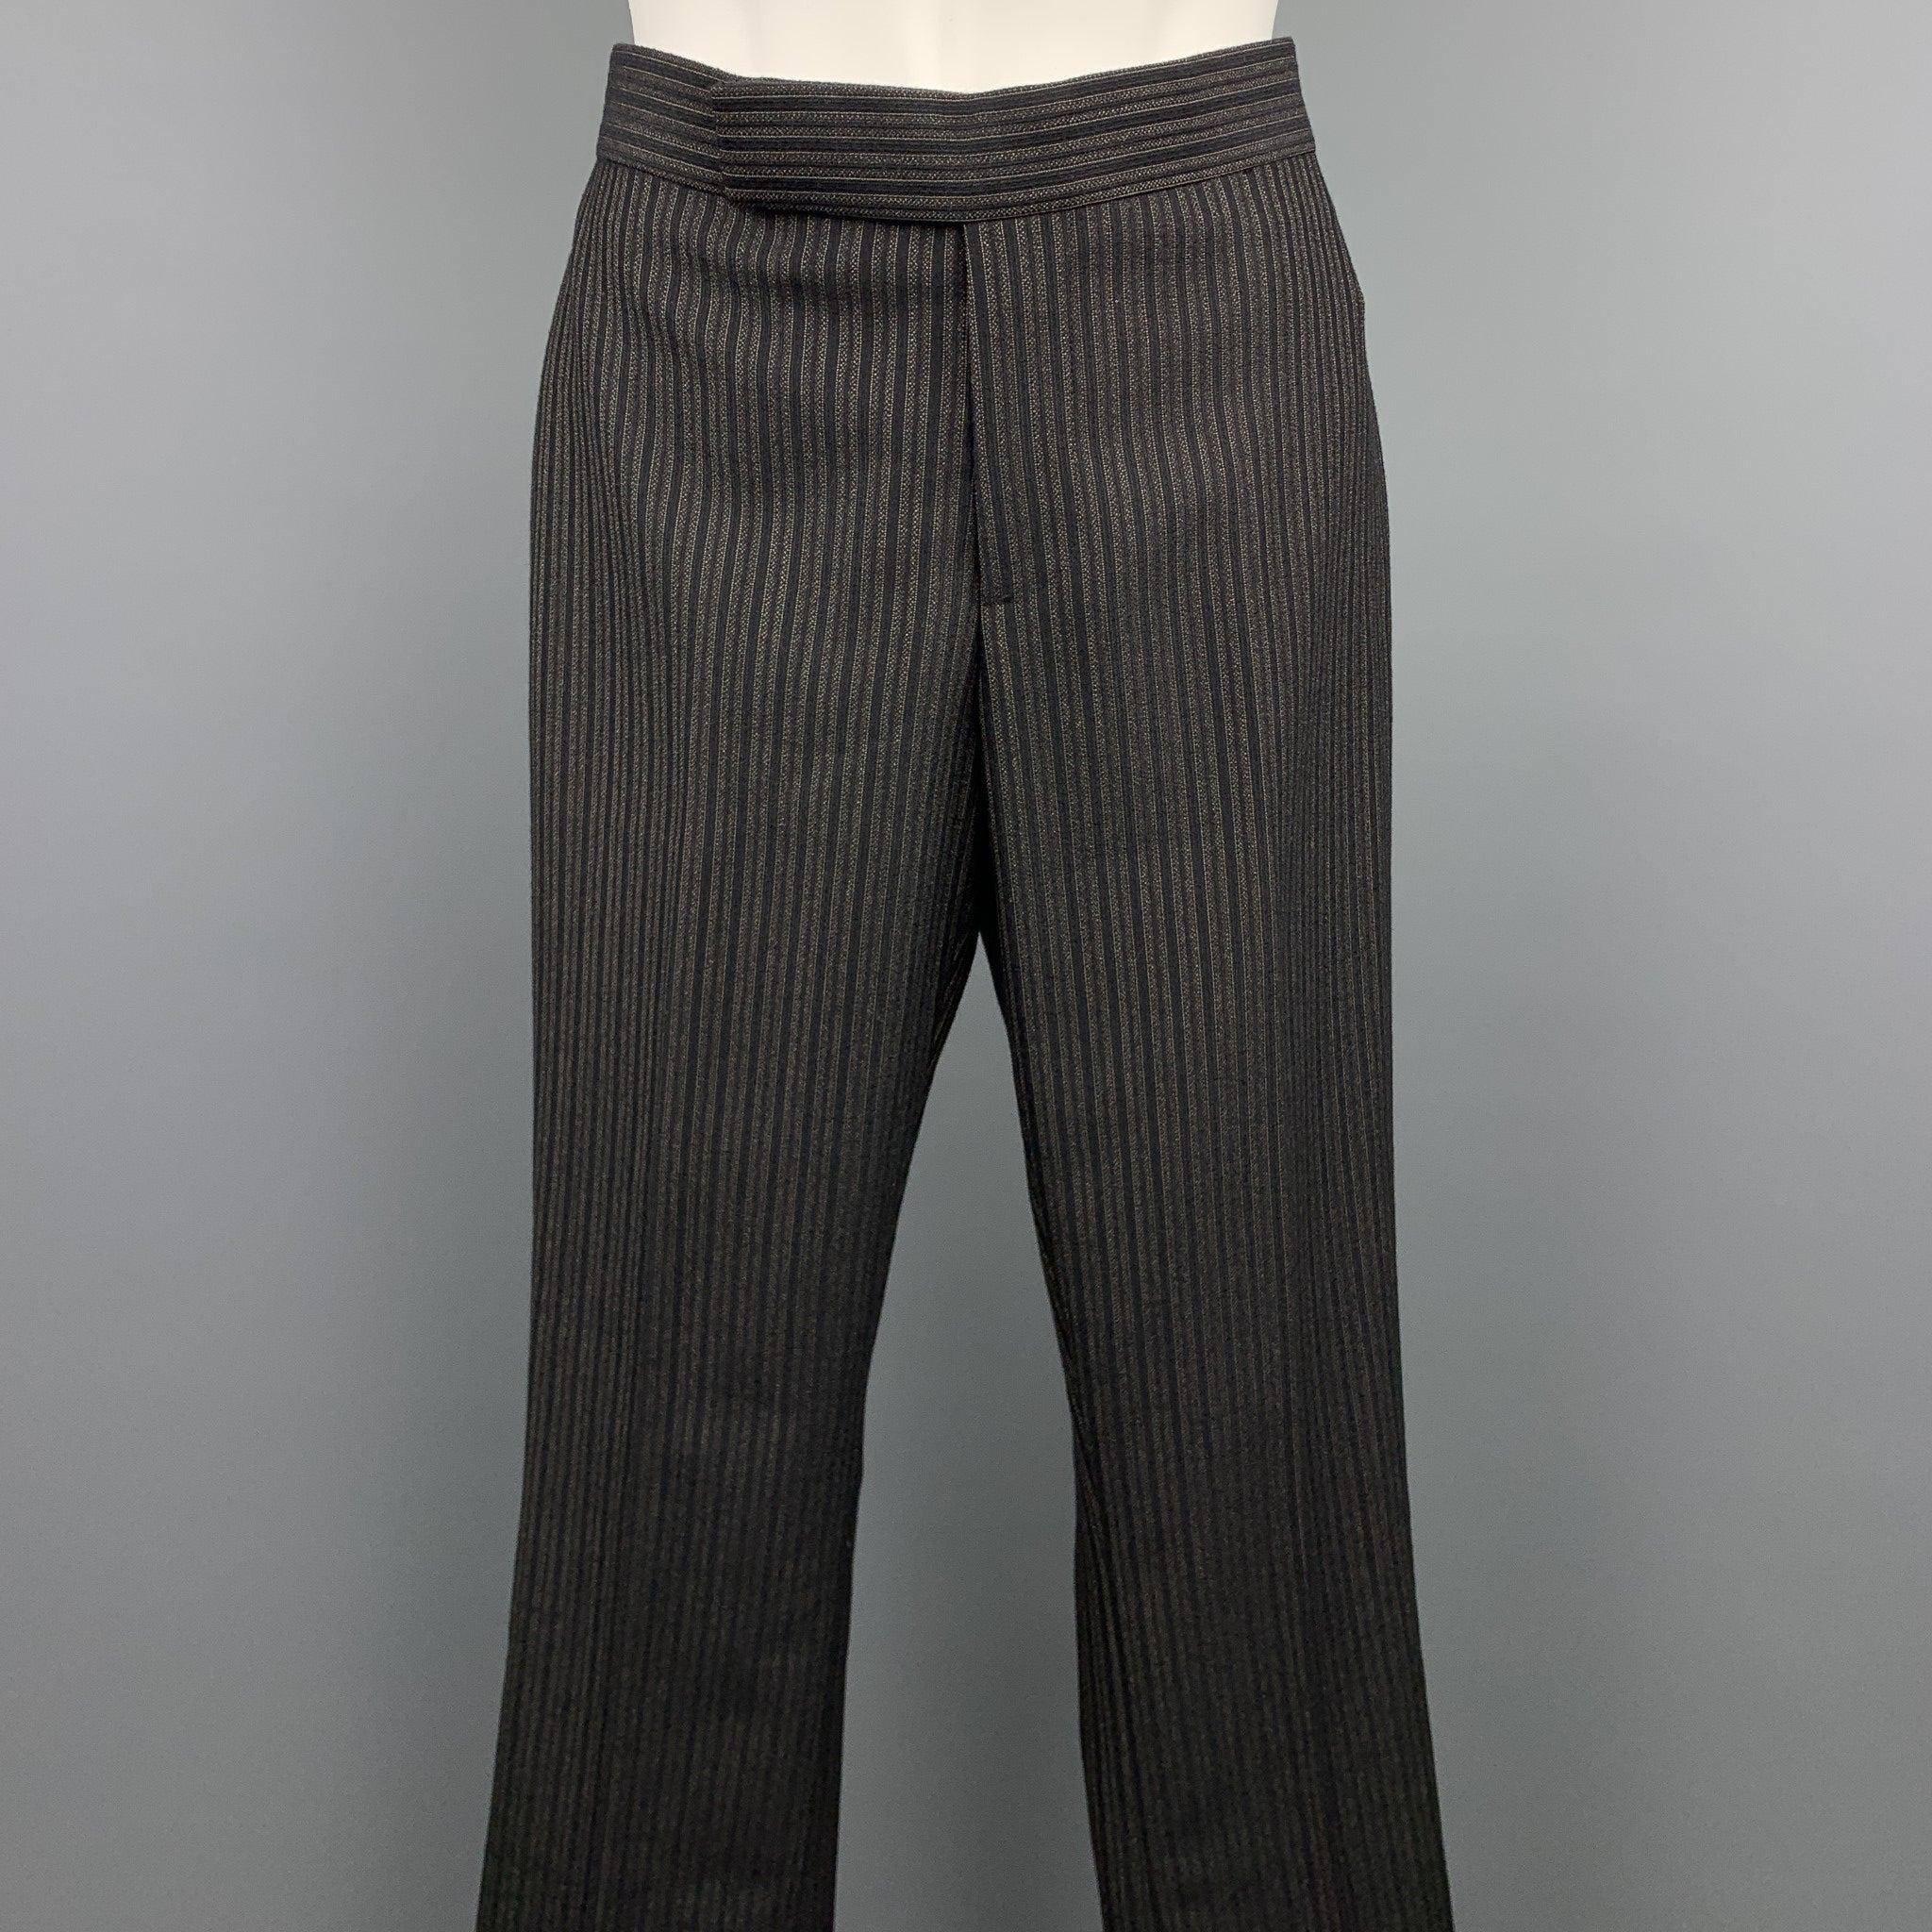 RALPH LAUREN COLLECTION dress pants comes in a black & grey striped wool featuring a straight leg, front tab, and a zip fly closure. Made in USA.Excellent
Pre-Owned Condition. 

Marked:   US 2 

Measurements: 
  Waist: 27 inches 
Rise: 7 inches